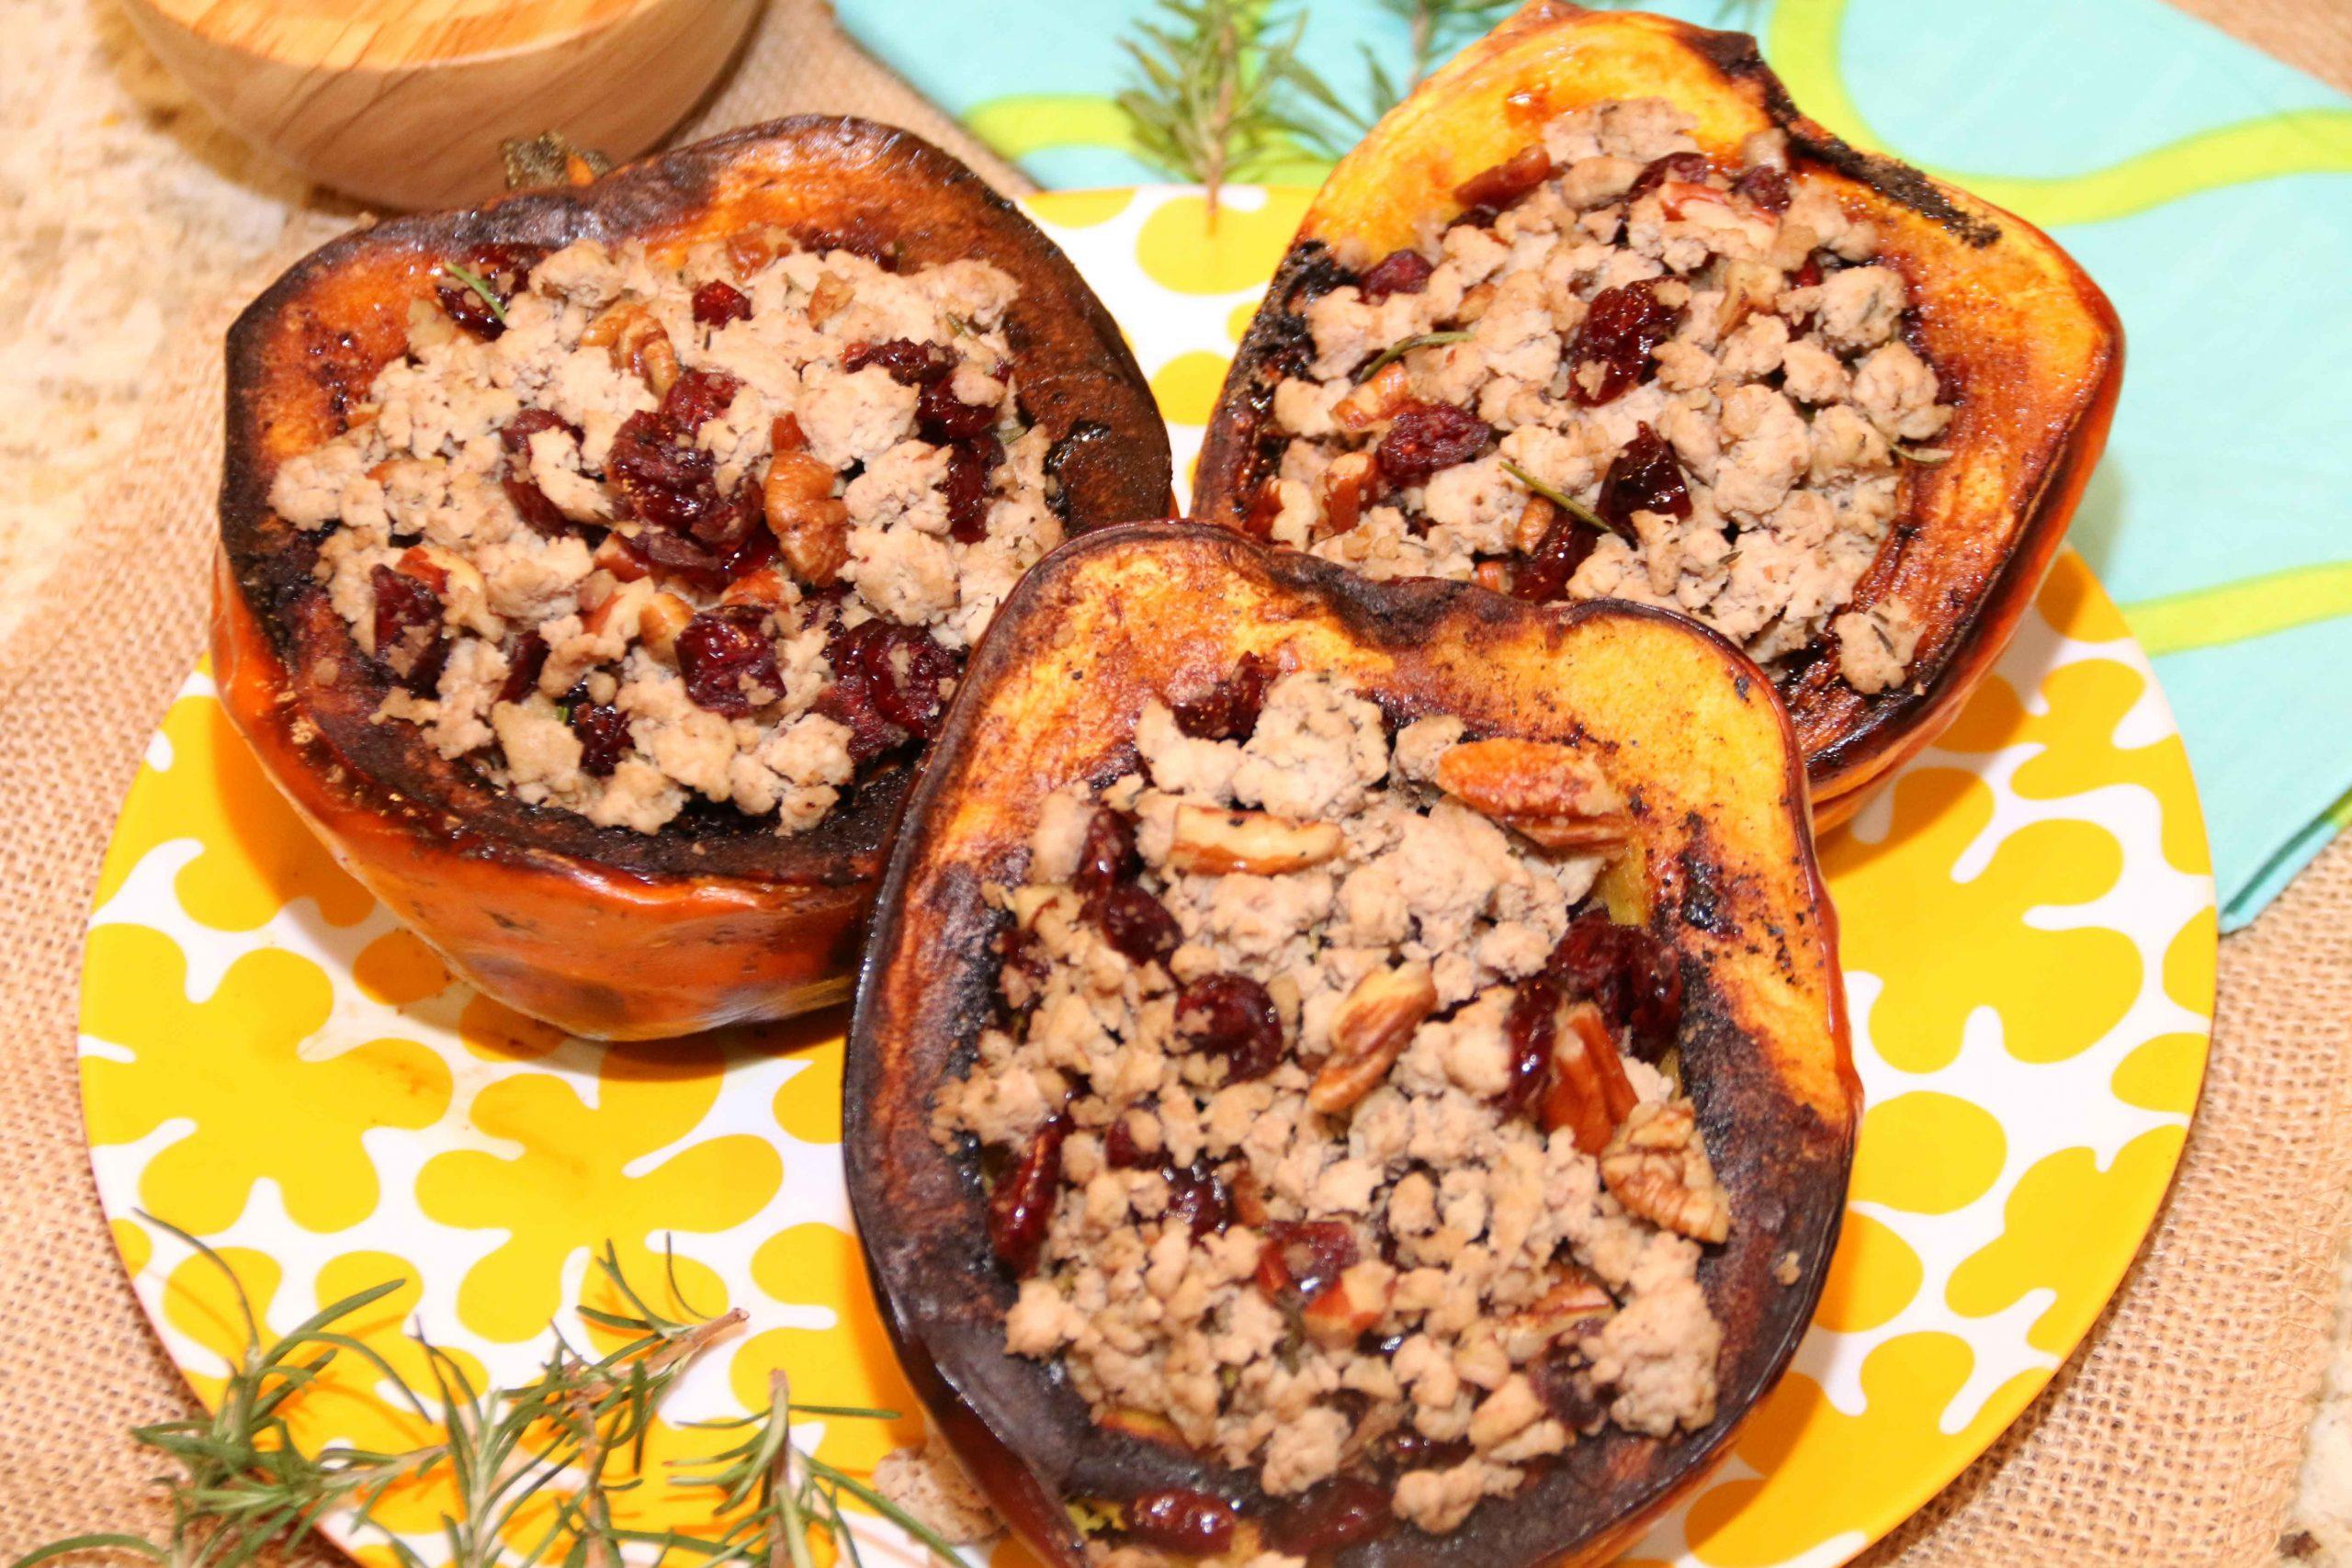 This acorn squash recipe is filled with all the flavors of Fall! A healthy and delicious dinner for any night of the week.